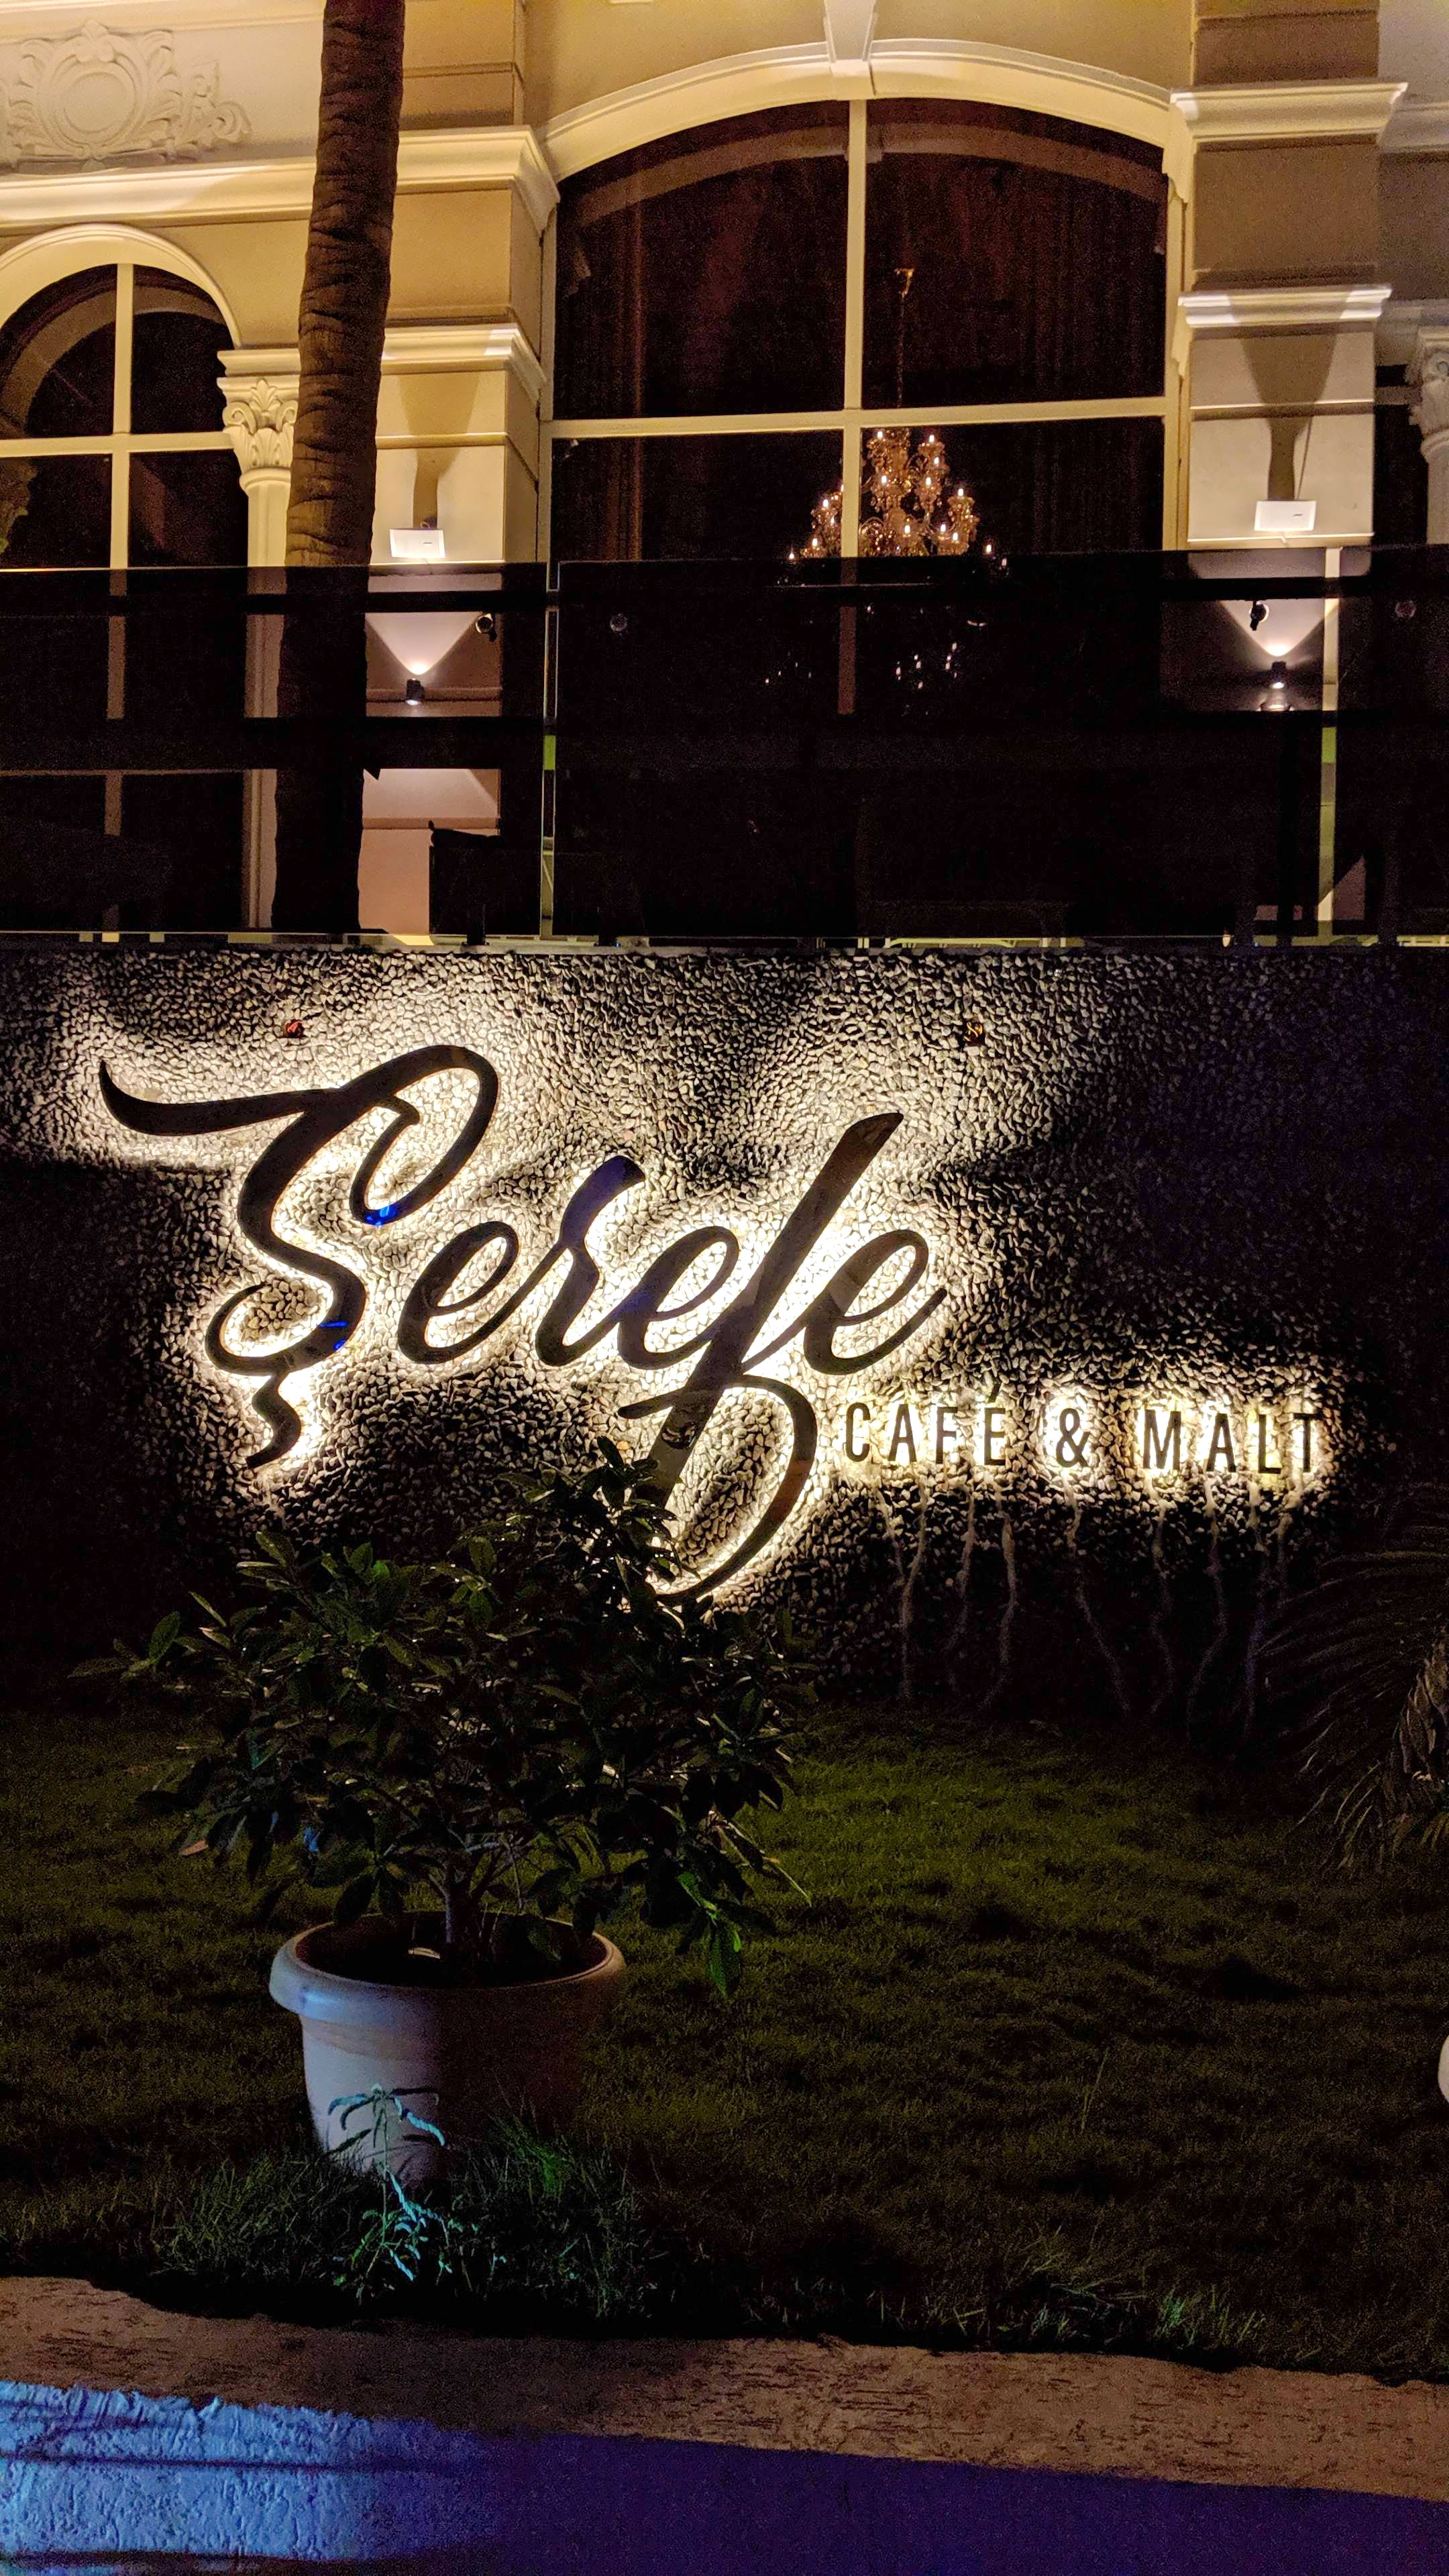 Light,Font,Night,Calligraphy,Architecture,Signage,Darkness,Drink